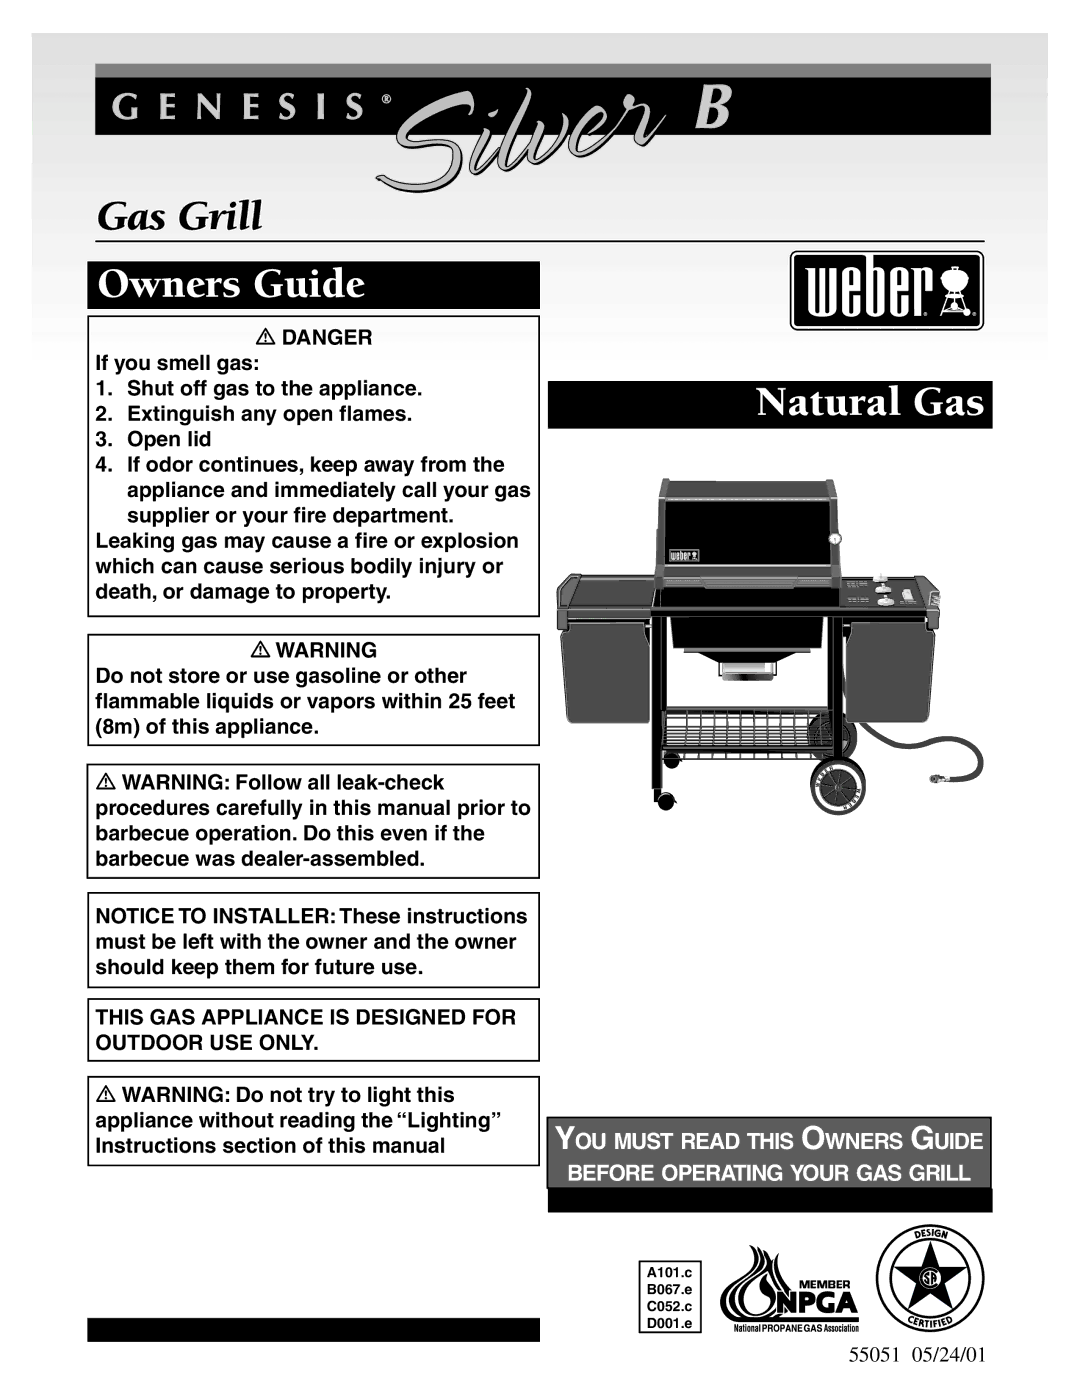 Weber B067.d, D001.e, C052.C, A100.d, Weber Genesis Silver B Gas Grill manual Owners Guide 